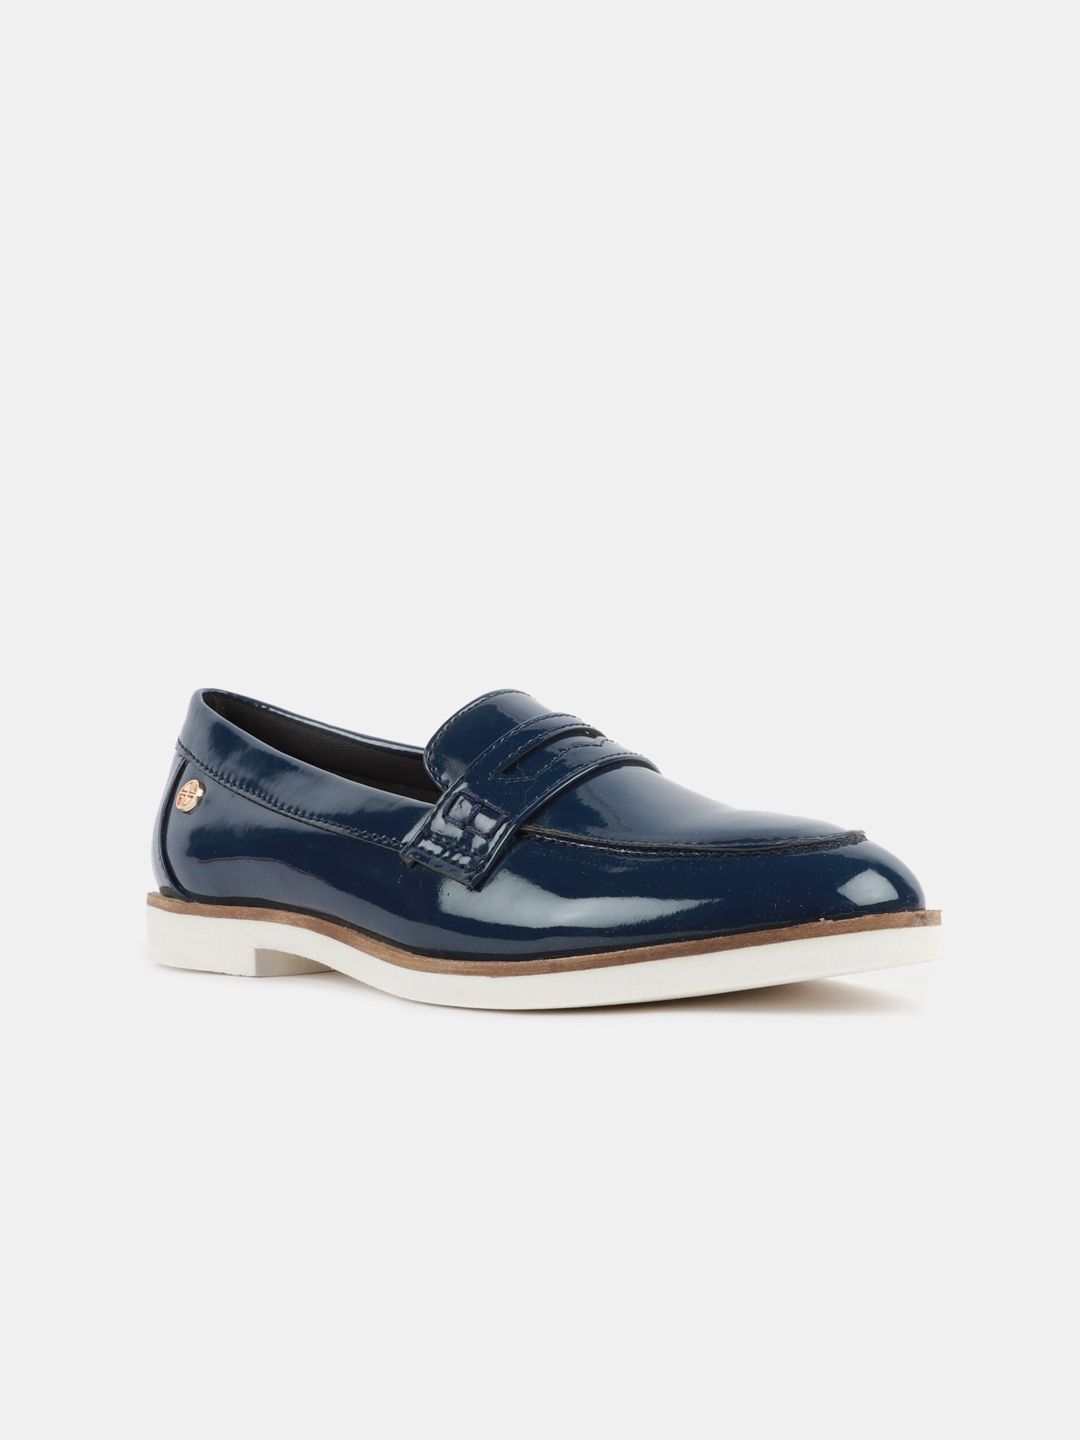 Carlton London Women Navy Navy Blue Loafers Price in India